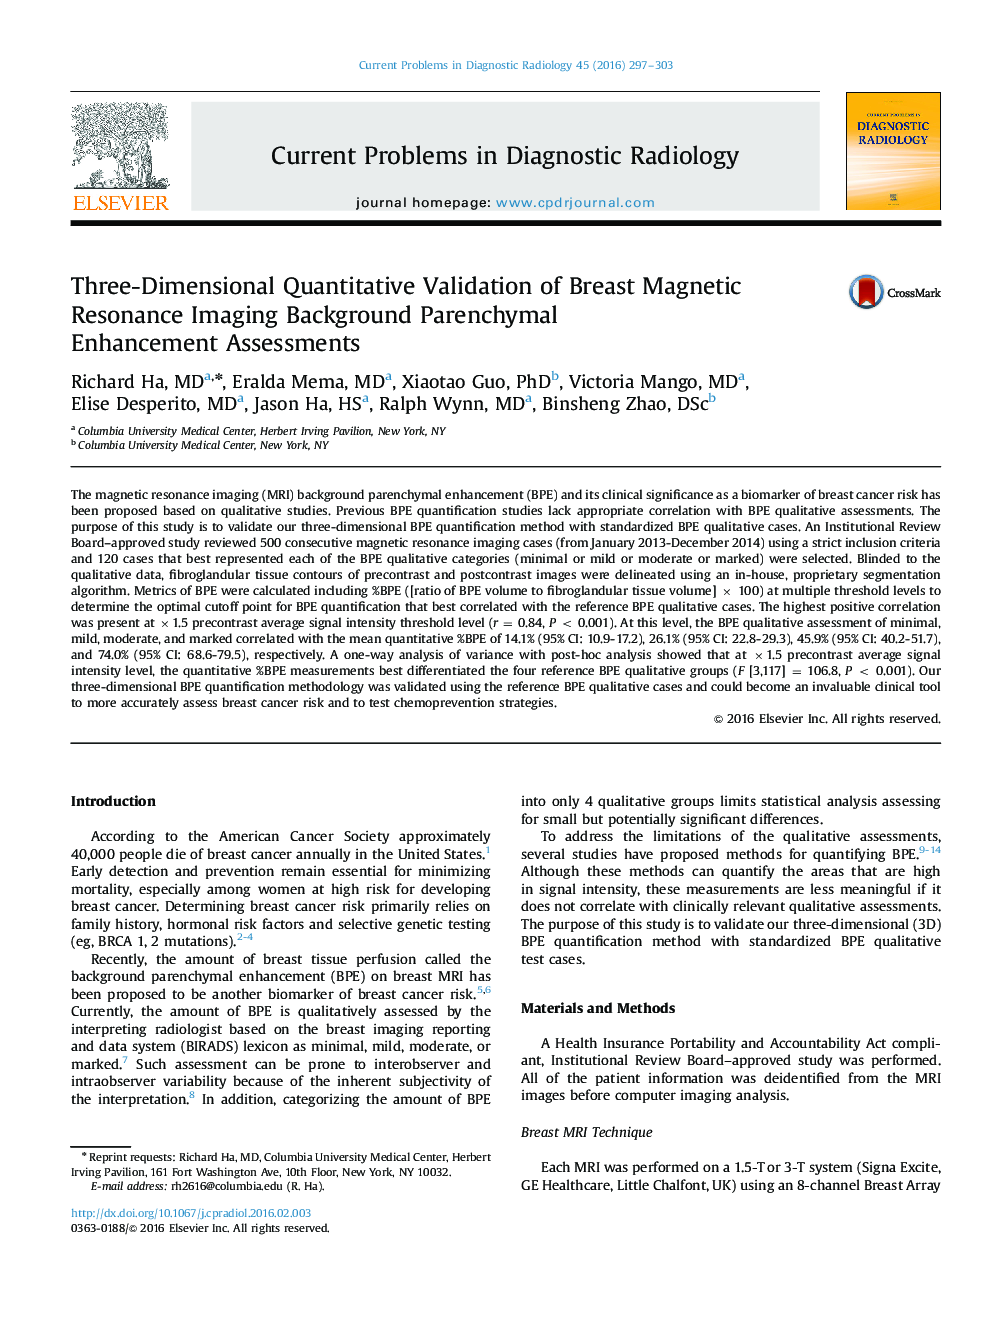 Three-Dimensional Quantitative Validation of Breast Magnetic Resonance Imaging Background Parenchymal Enhancement Assessments